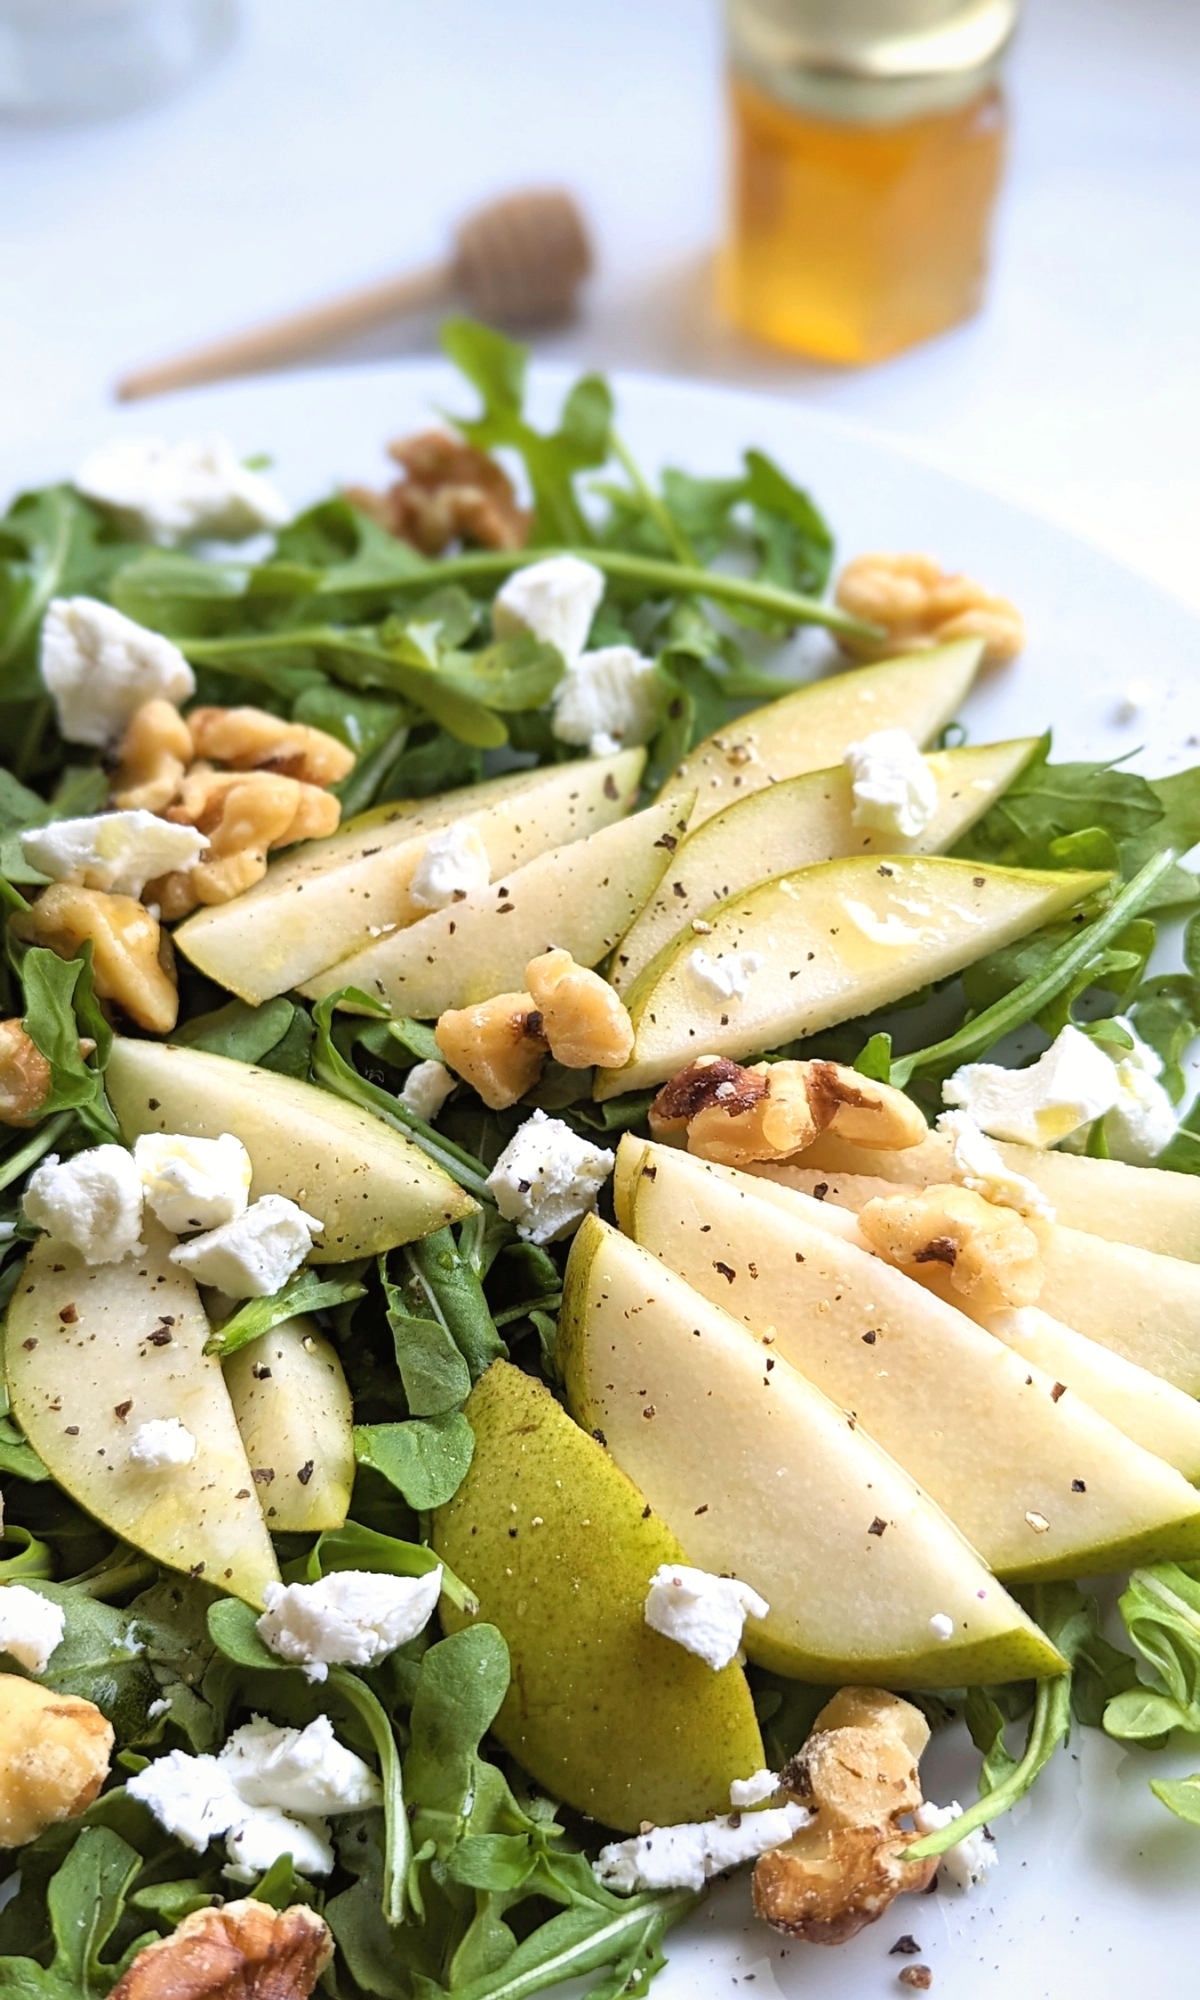 salad with pears and arugula easy honey pear salad with goat cheese and walnuts fancy salads for company entertaining and guests.